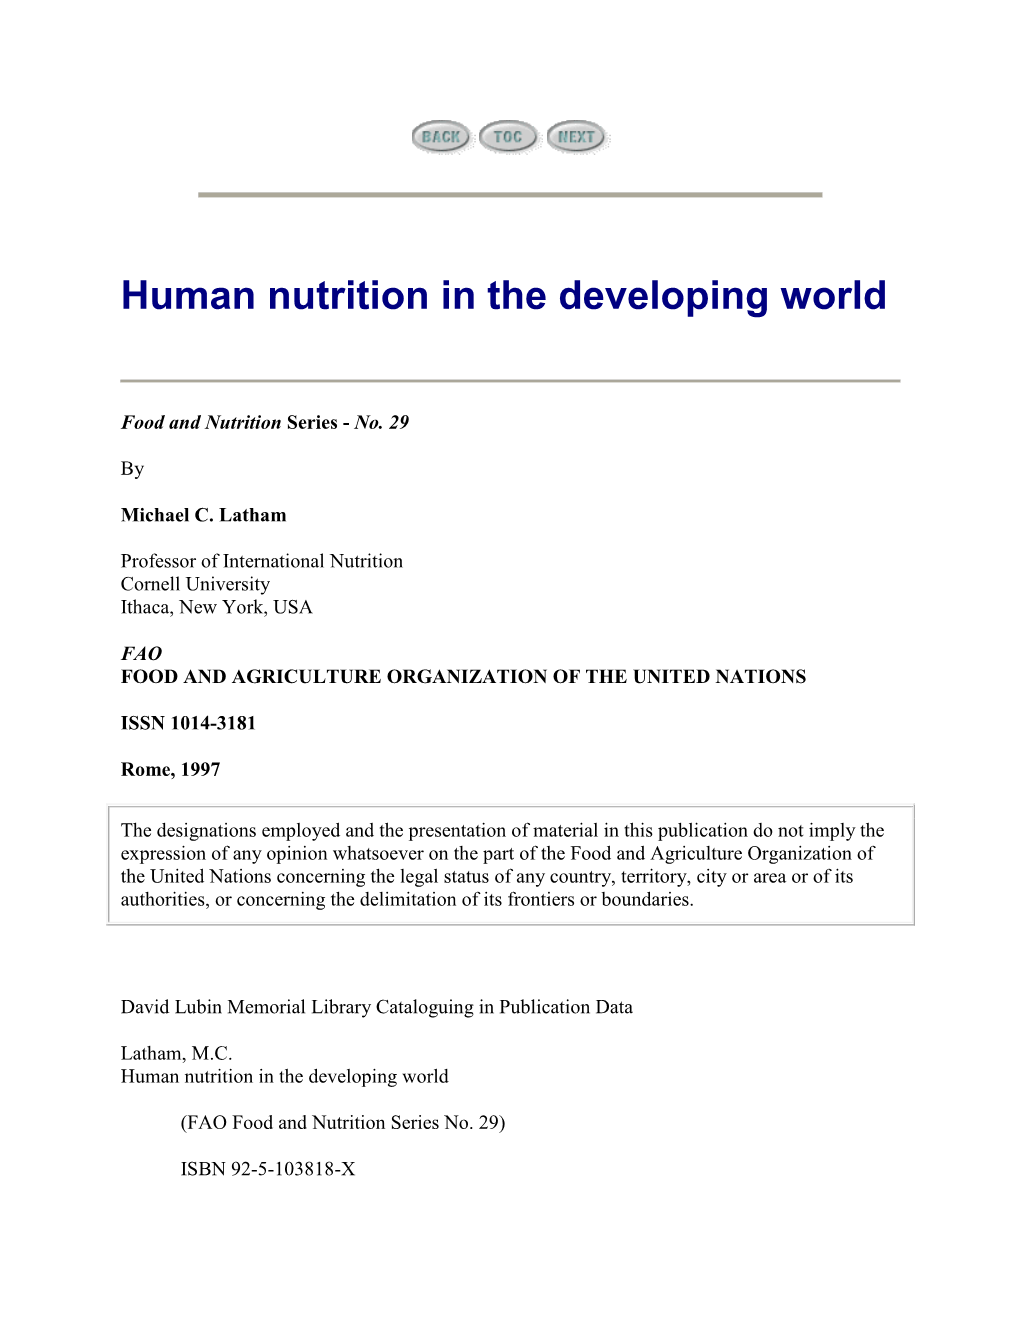 Human Nutrition in the Developing World